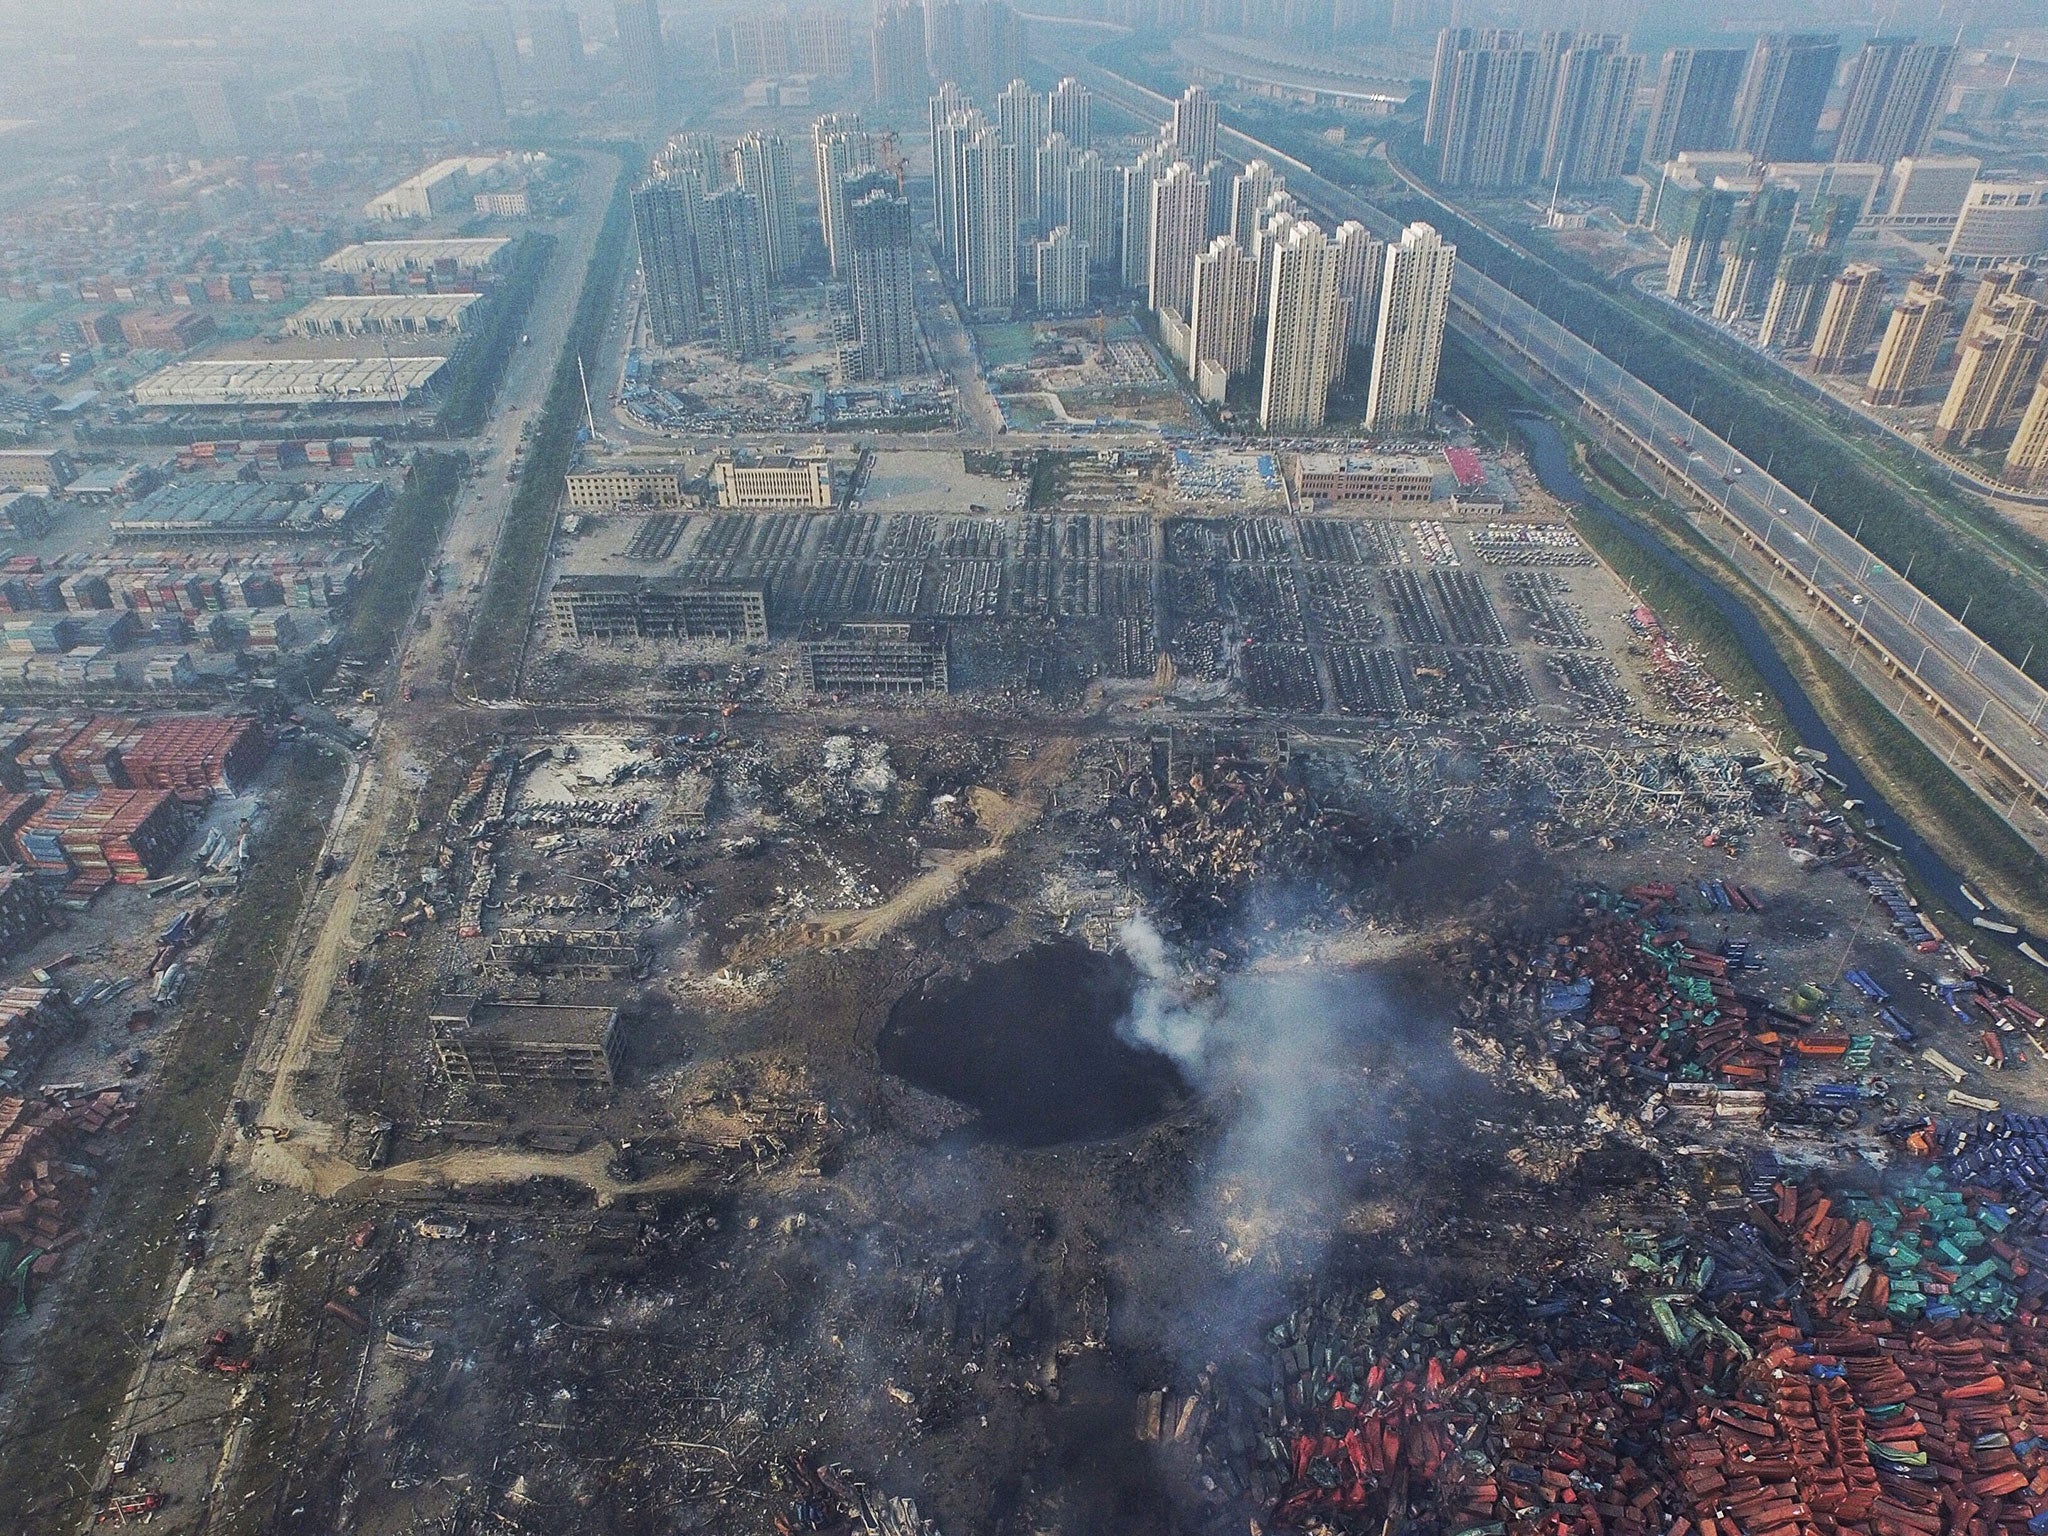 The site of the explosion in Tianjin (EPA)